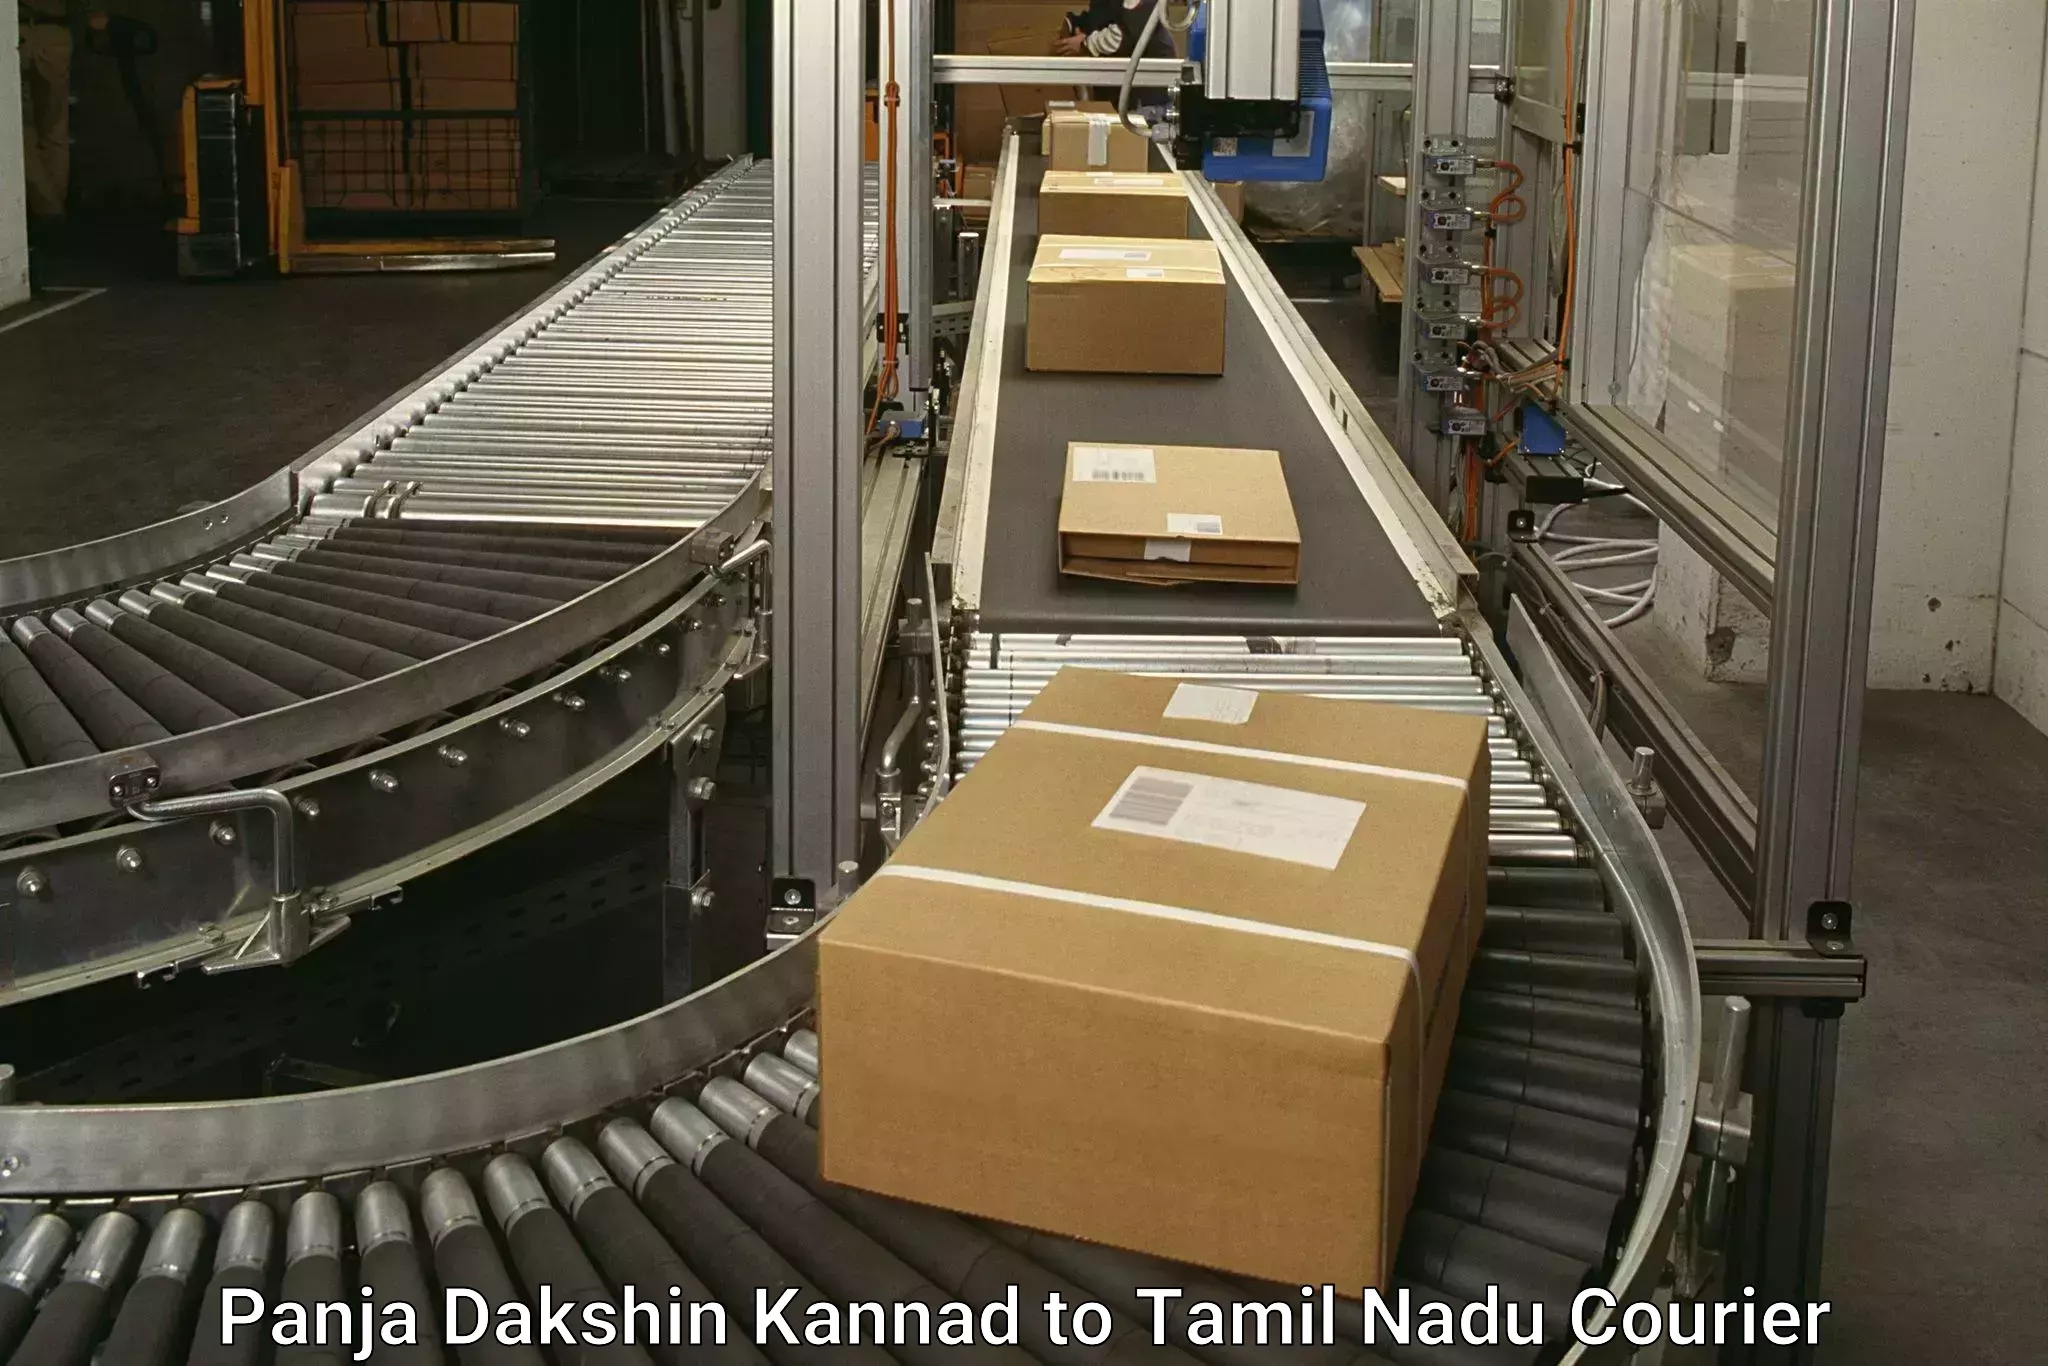 Full-service courier options Panja Dakshin Kannad to Shanmugha Arts Science Technology and Research Academy Thanjavur